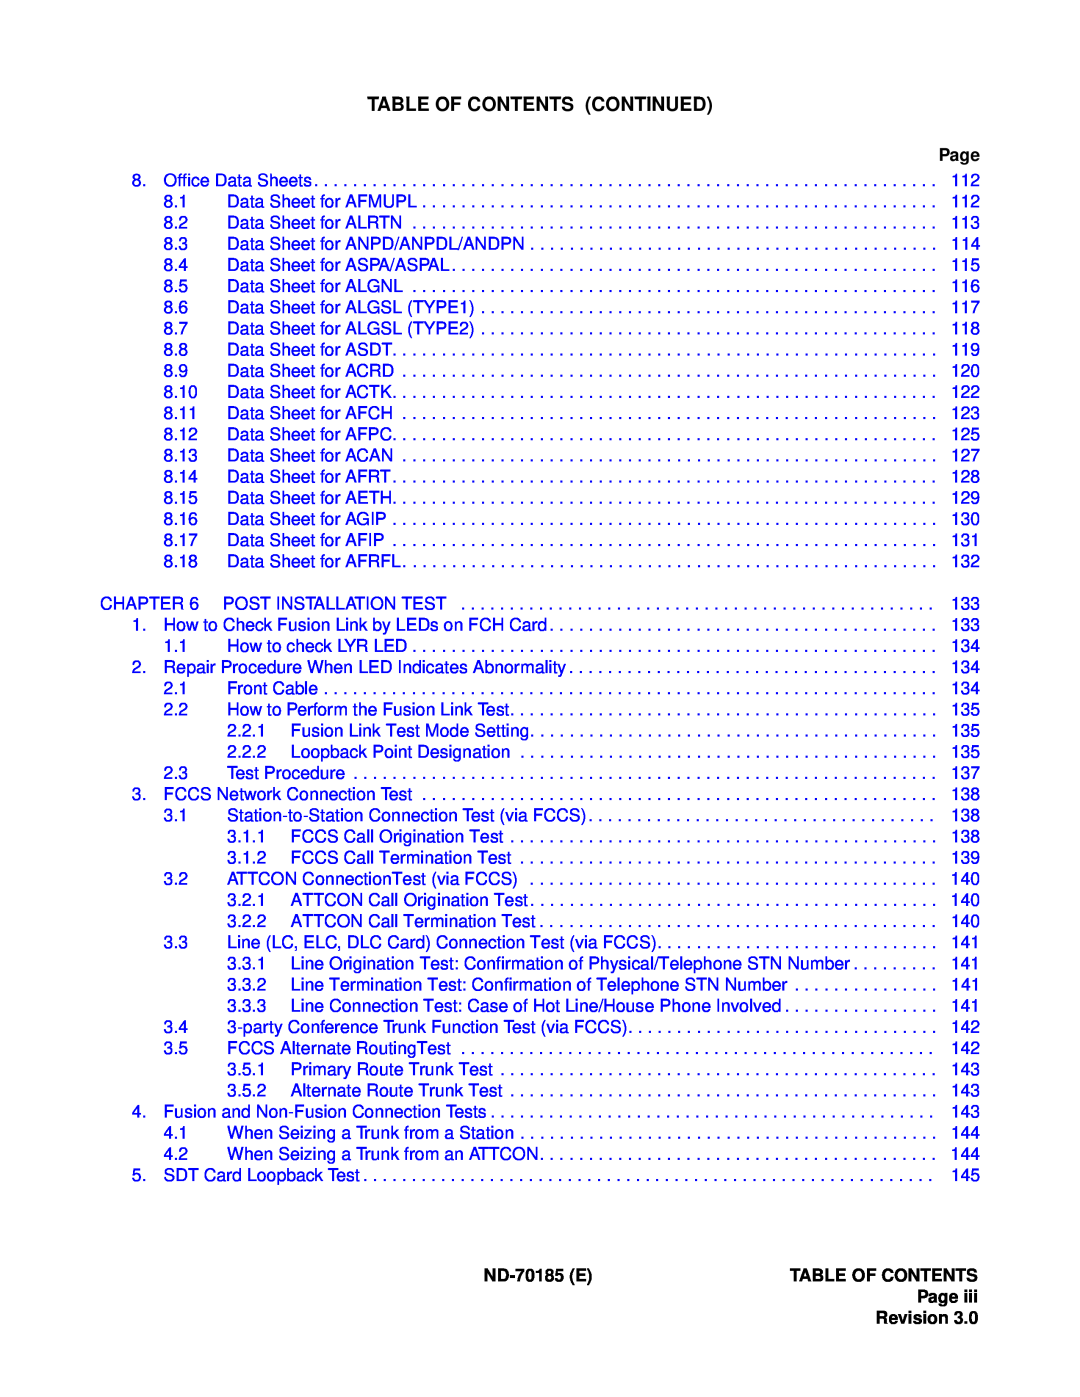 NEC NEAX2400 system manual Table Of Contents Continued, ND-70185ETABLE OF CONTENTS Page Revision 